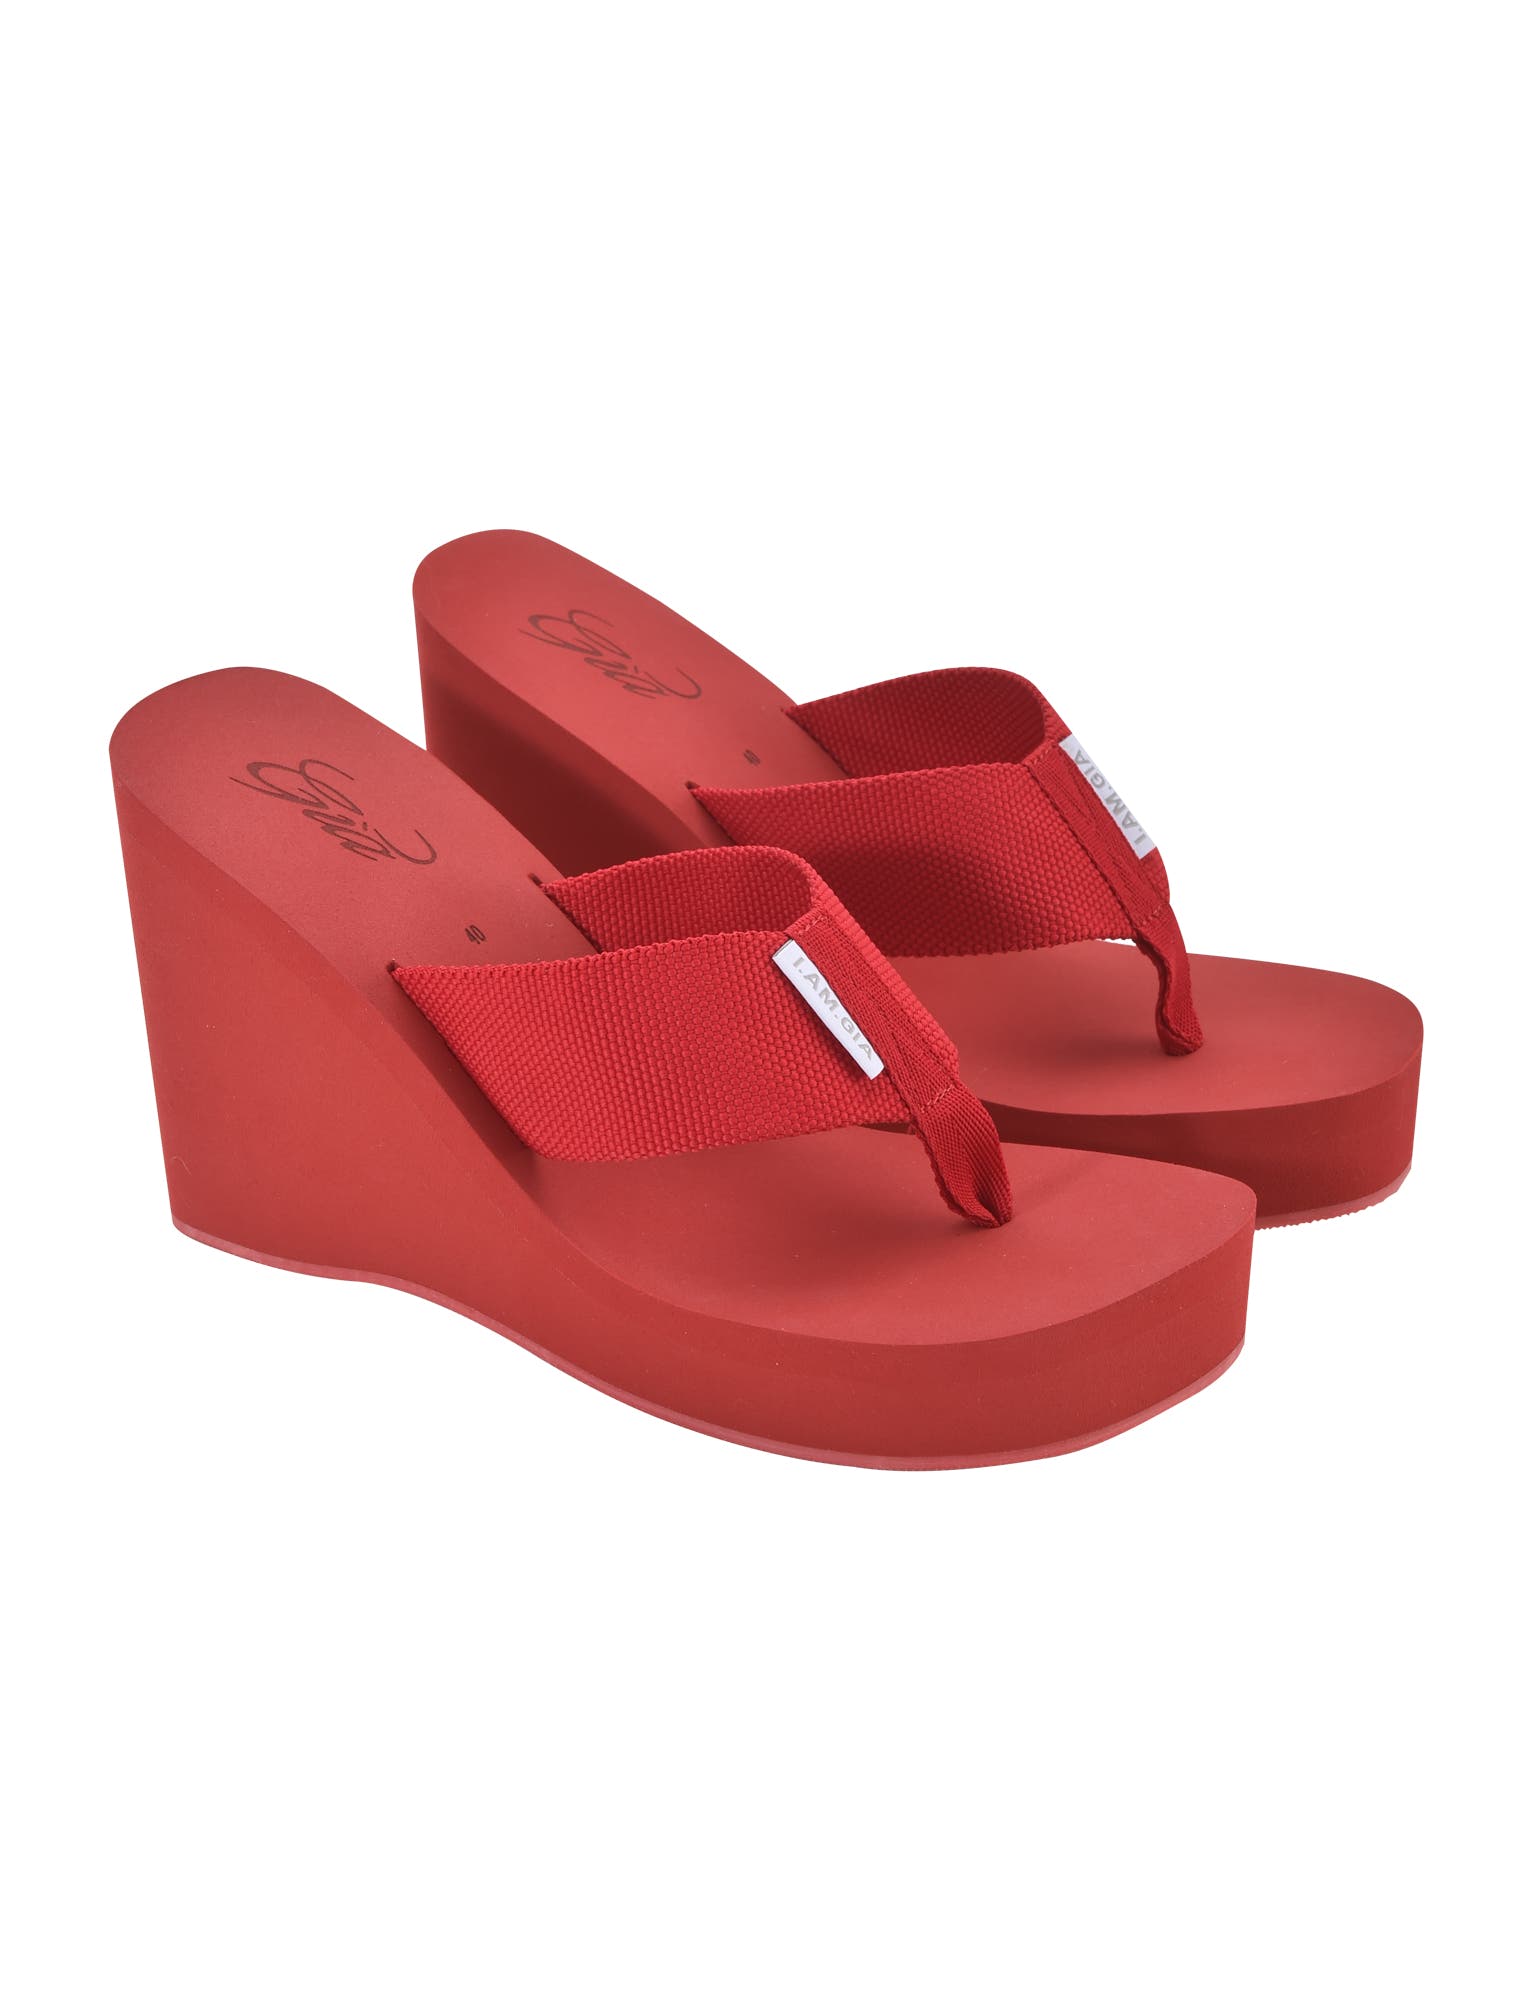 SHELBY FLIP FLOP - RED